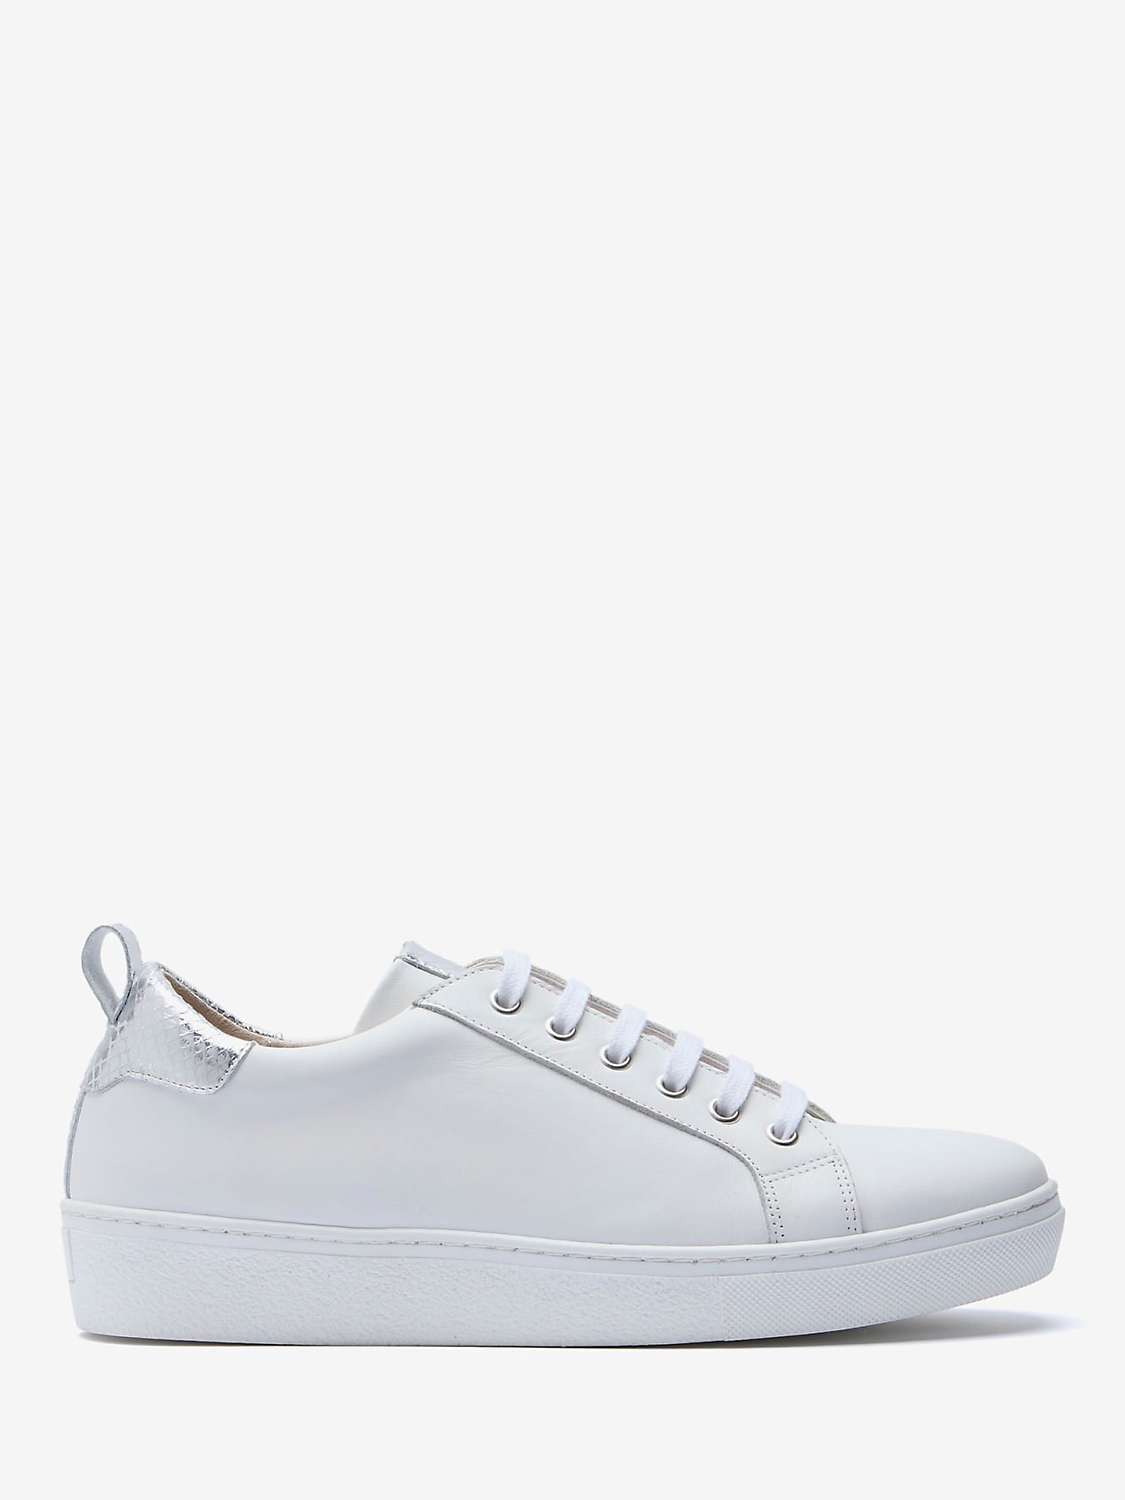 Buy Mint Velvet Leather Lace-Up Trainers, White/Silver Online at johnlewis.com